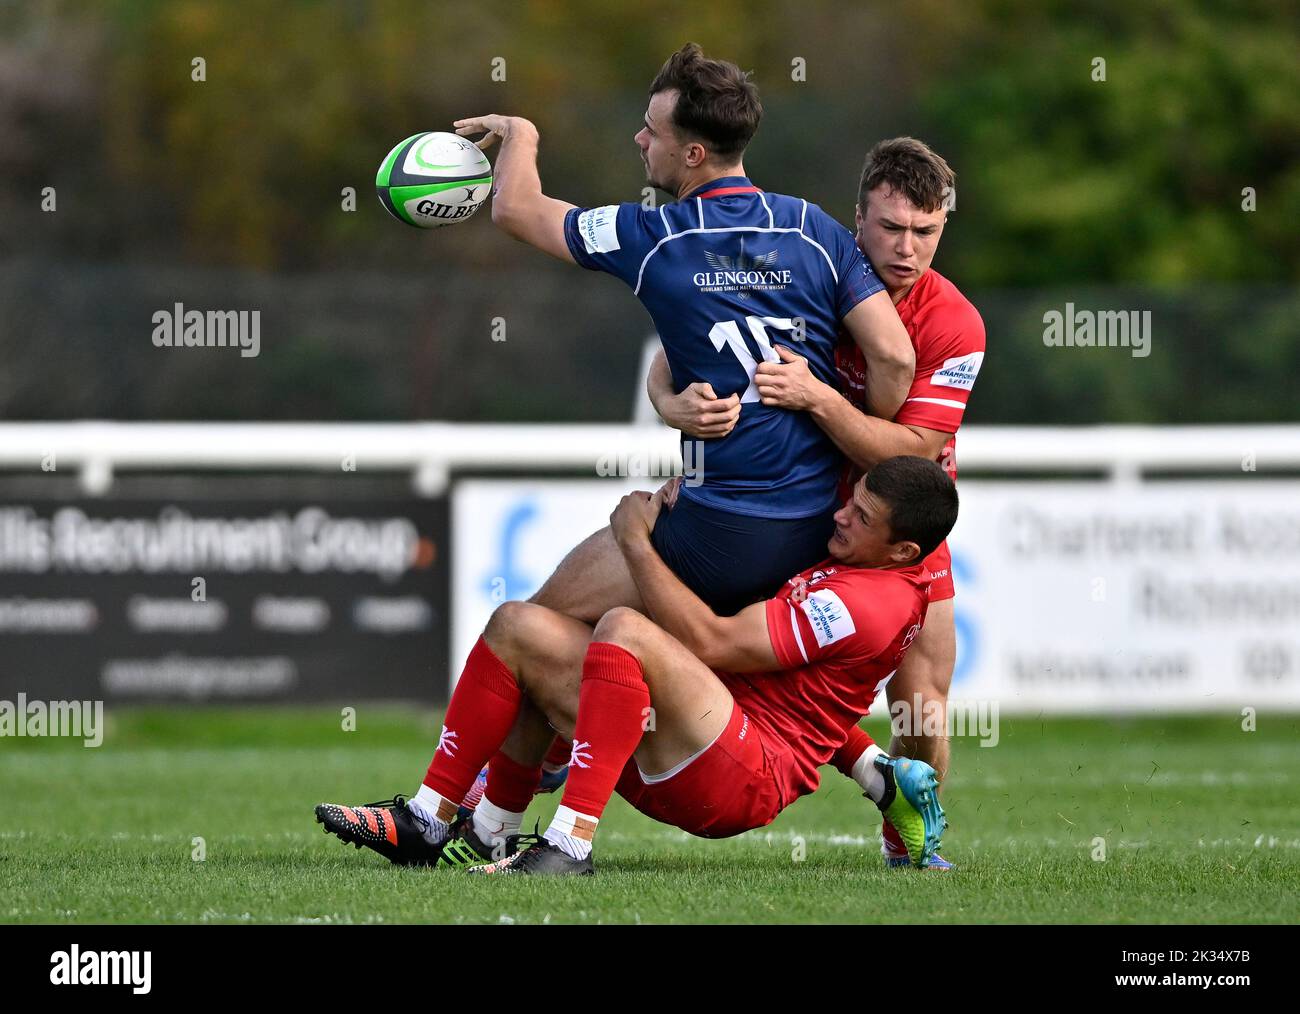 Richmond, United Kingdom. 24th Sep, 2022. Championship Rugby. London Scottish V Jersey Reds. The Richmond Athletic Ground. Richmond. Cam Anderson (London Scottish) is tackled by Russell Bennett (Jersey Reds, lower) and Charlie Powell (Jersey Reds) during the London Scottish V Jersey Reds championship rugby match. Credit: Sport In Pictures/Alamy Live News Stock Photo